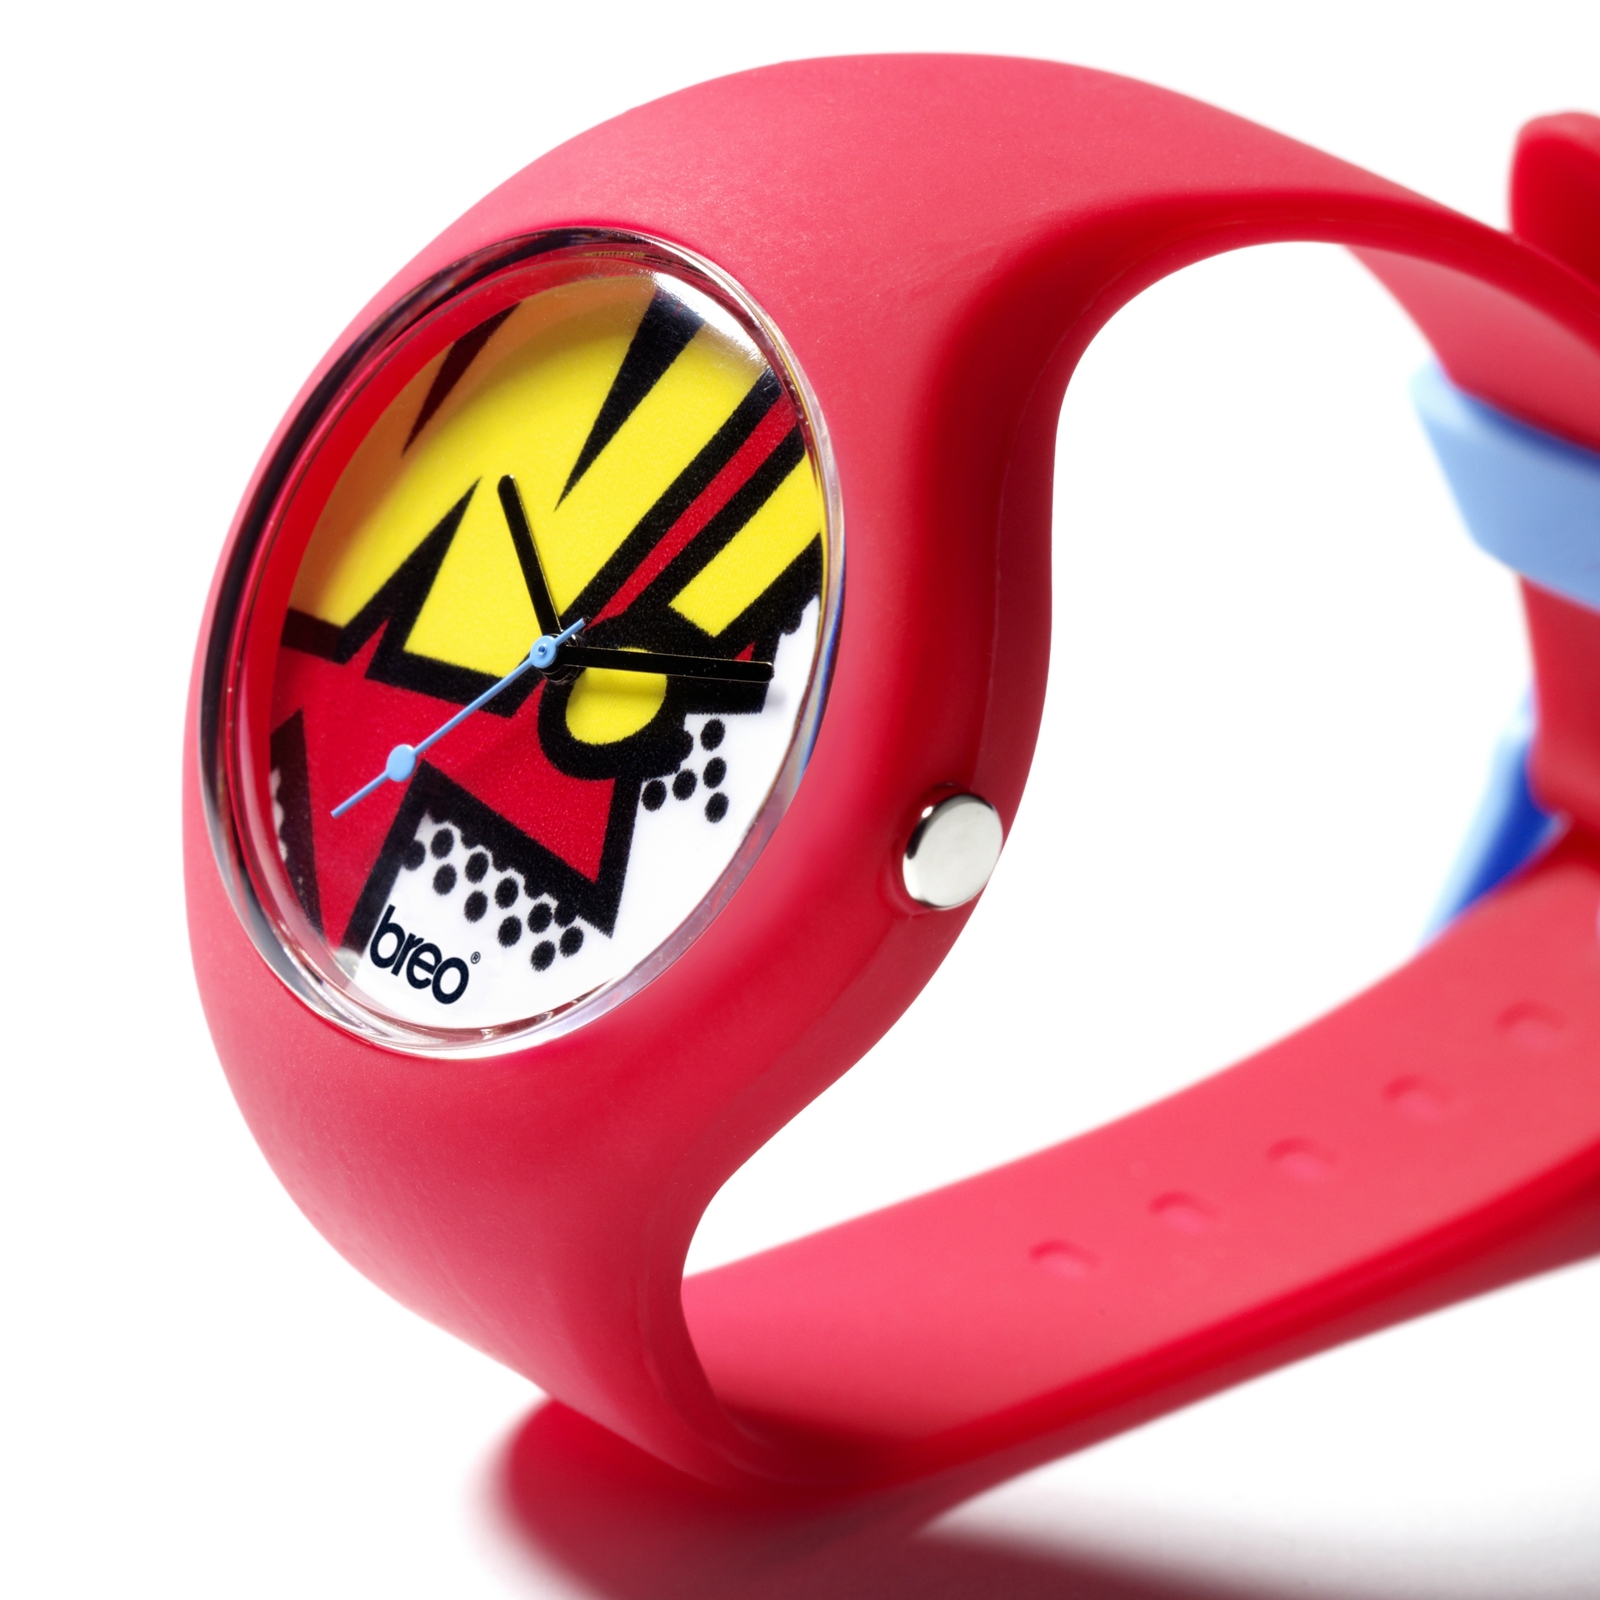 Breo Classic pop art inspired watch giveaway